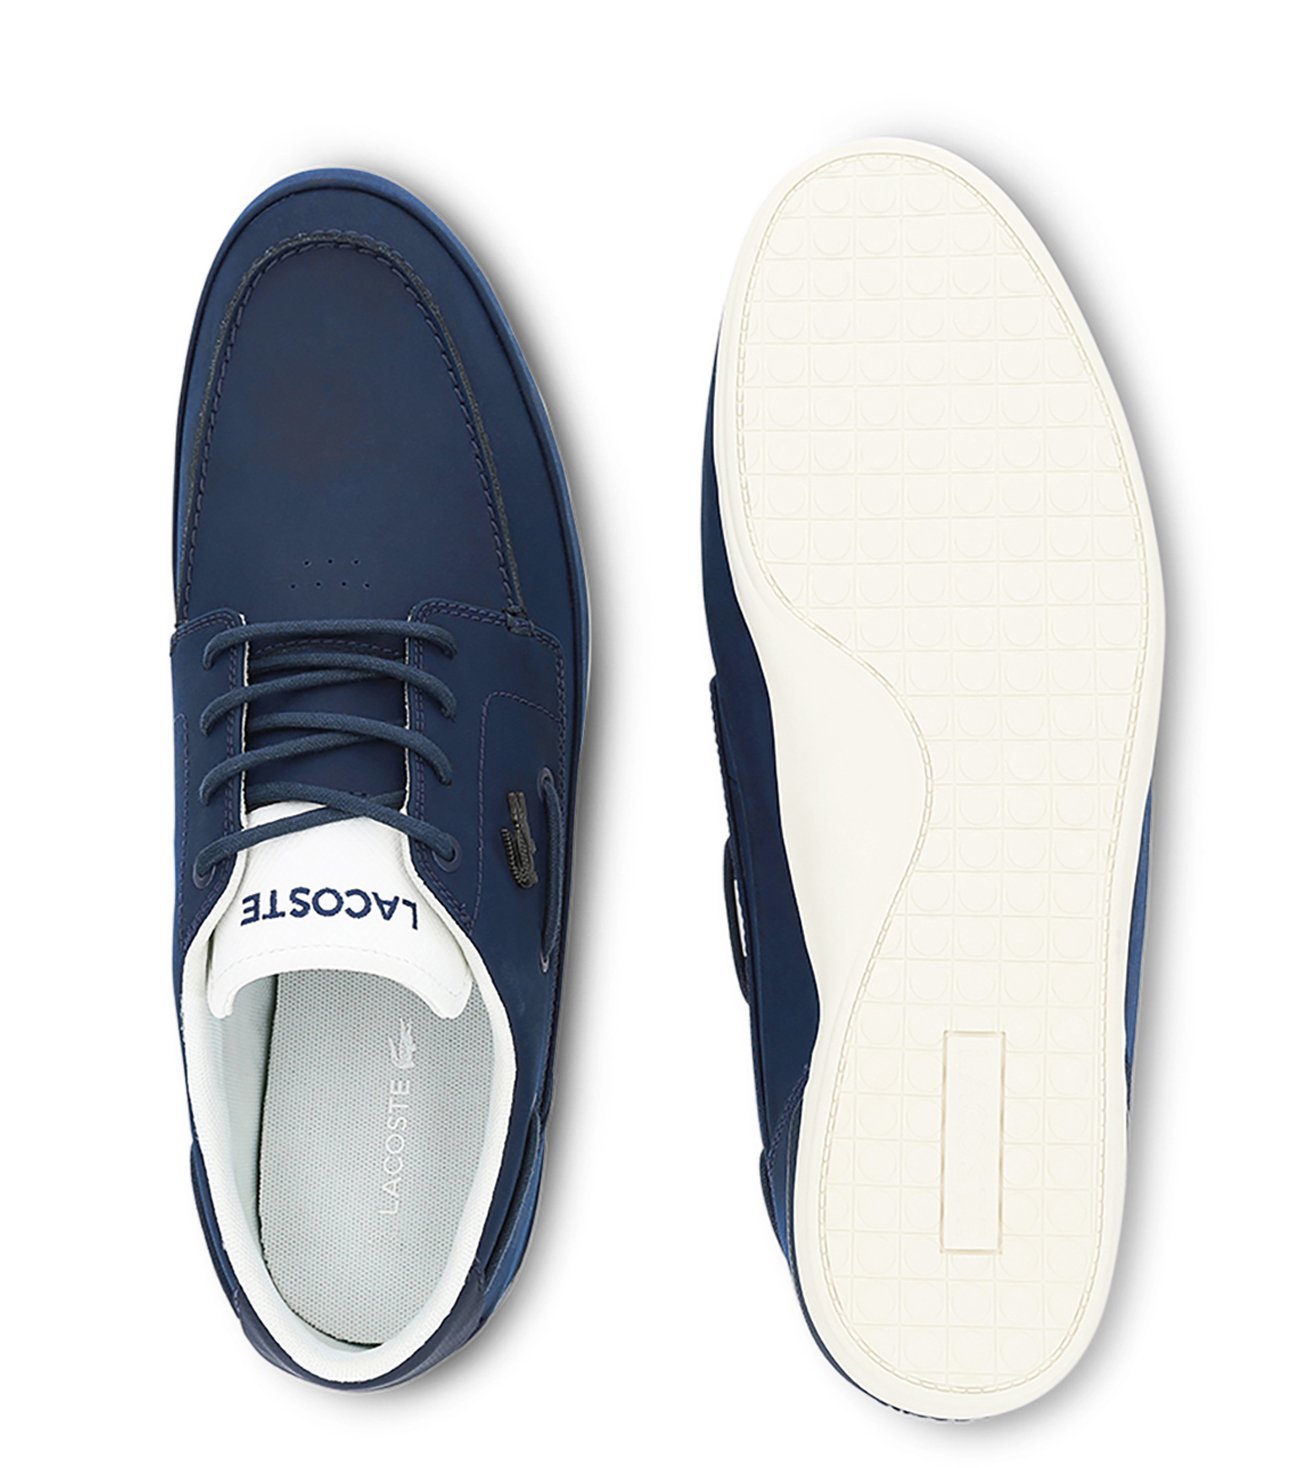 lacoste marina leather deck shoes